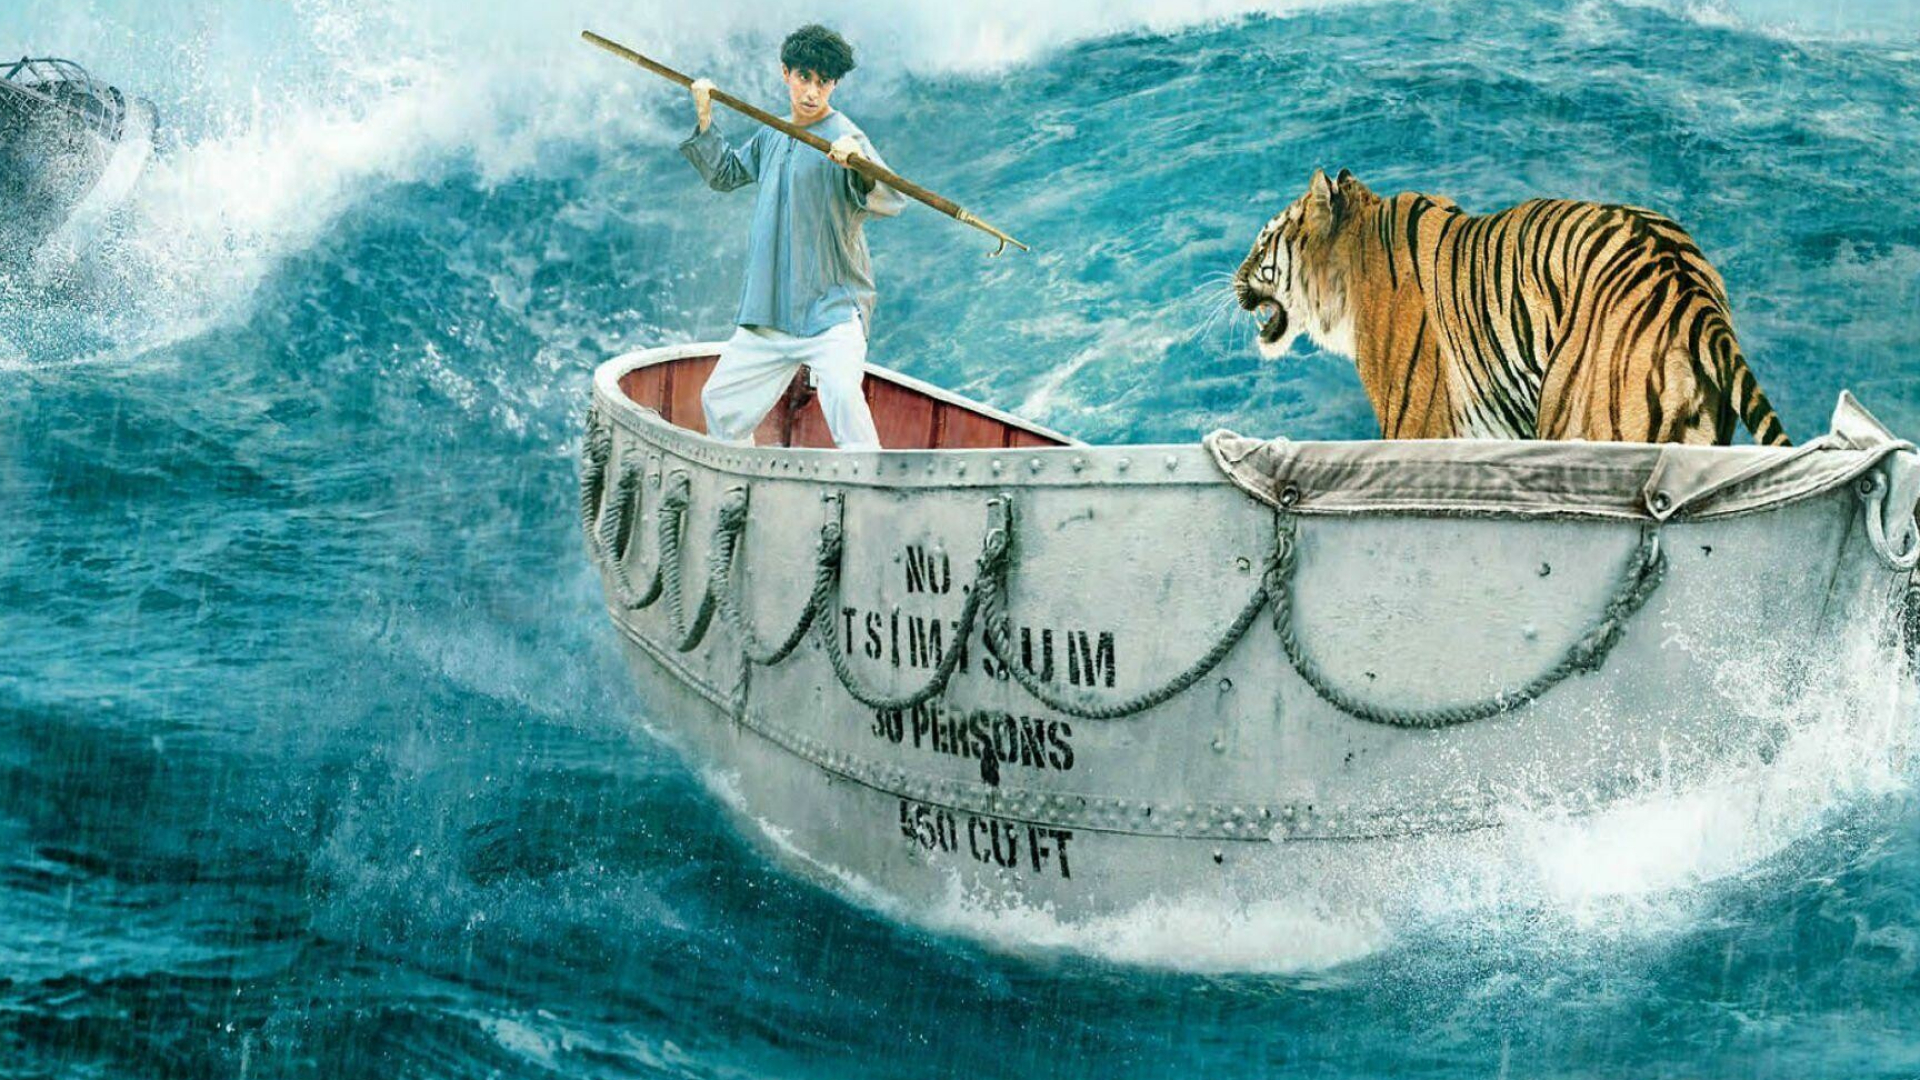 Life of Pi: The film tells the story of a young boy who, after a ship carrying his family to Canada sinks, finds himself stranded in the middle of the Pacific Ocean with an adult Bengal Tiger. 1920x1080 Full HD Background.